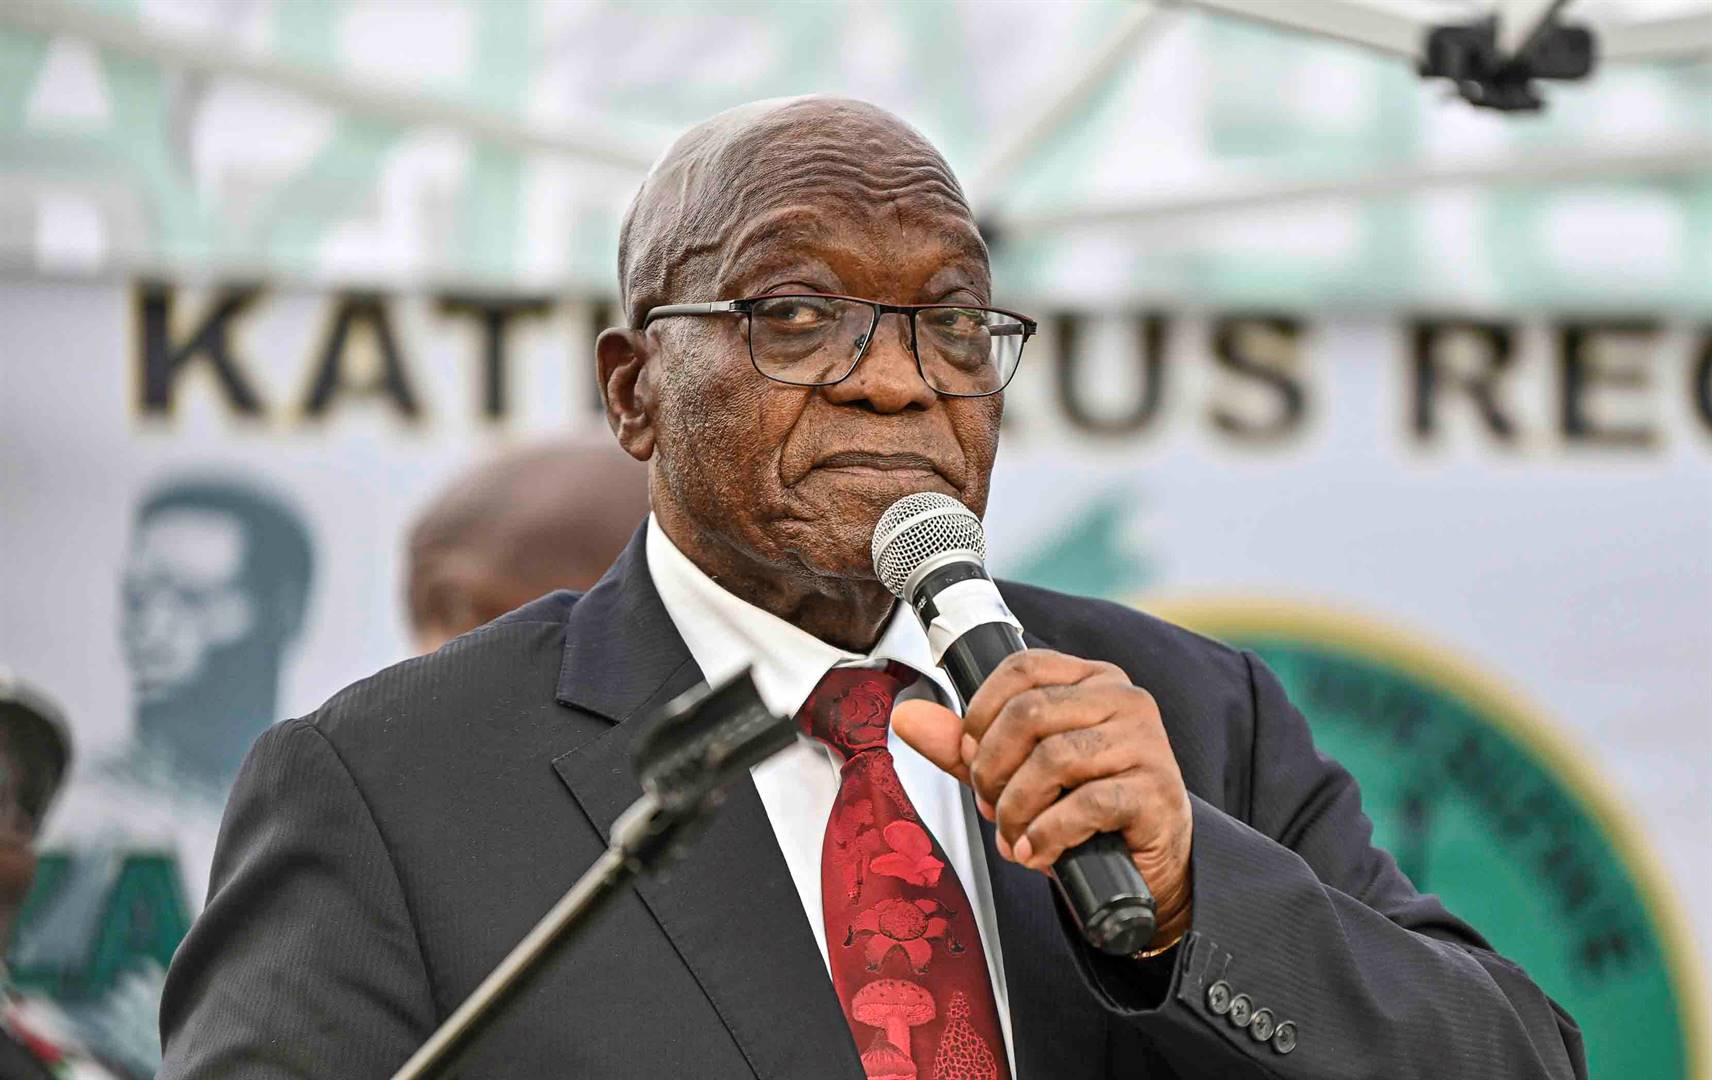 Jacob Zuma, former president of the ANC and now leader of uMkhonto we Sizwe once said that the signal that Jesus will return would be the ANC losing power. (Mlungisi Louw / Gallo Images )